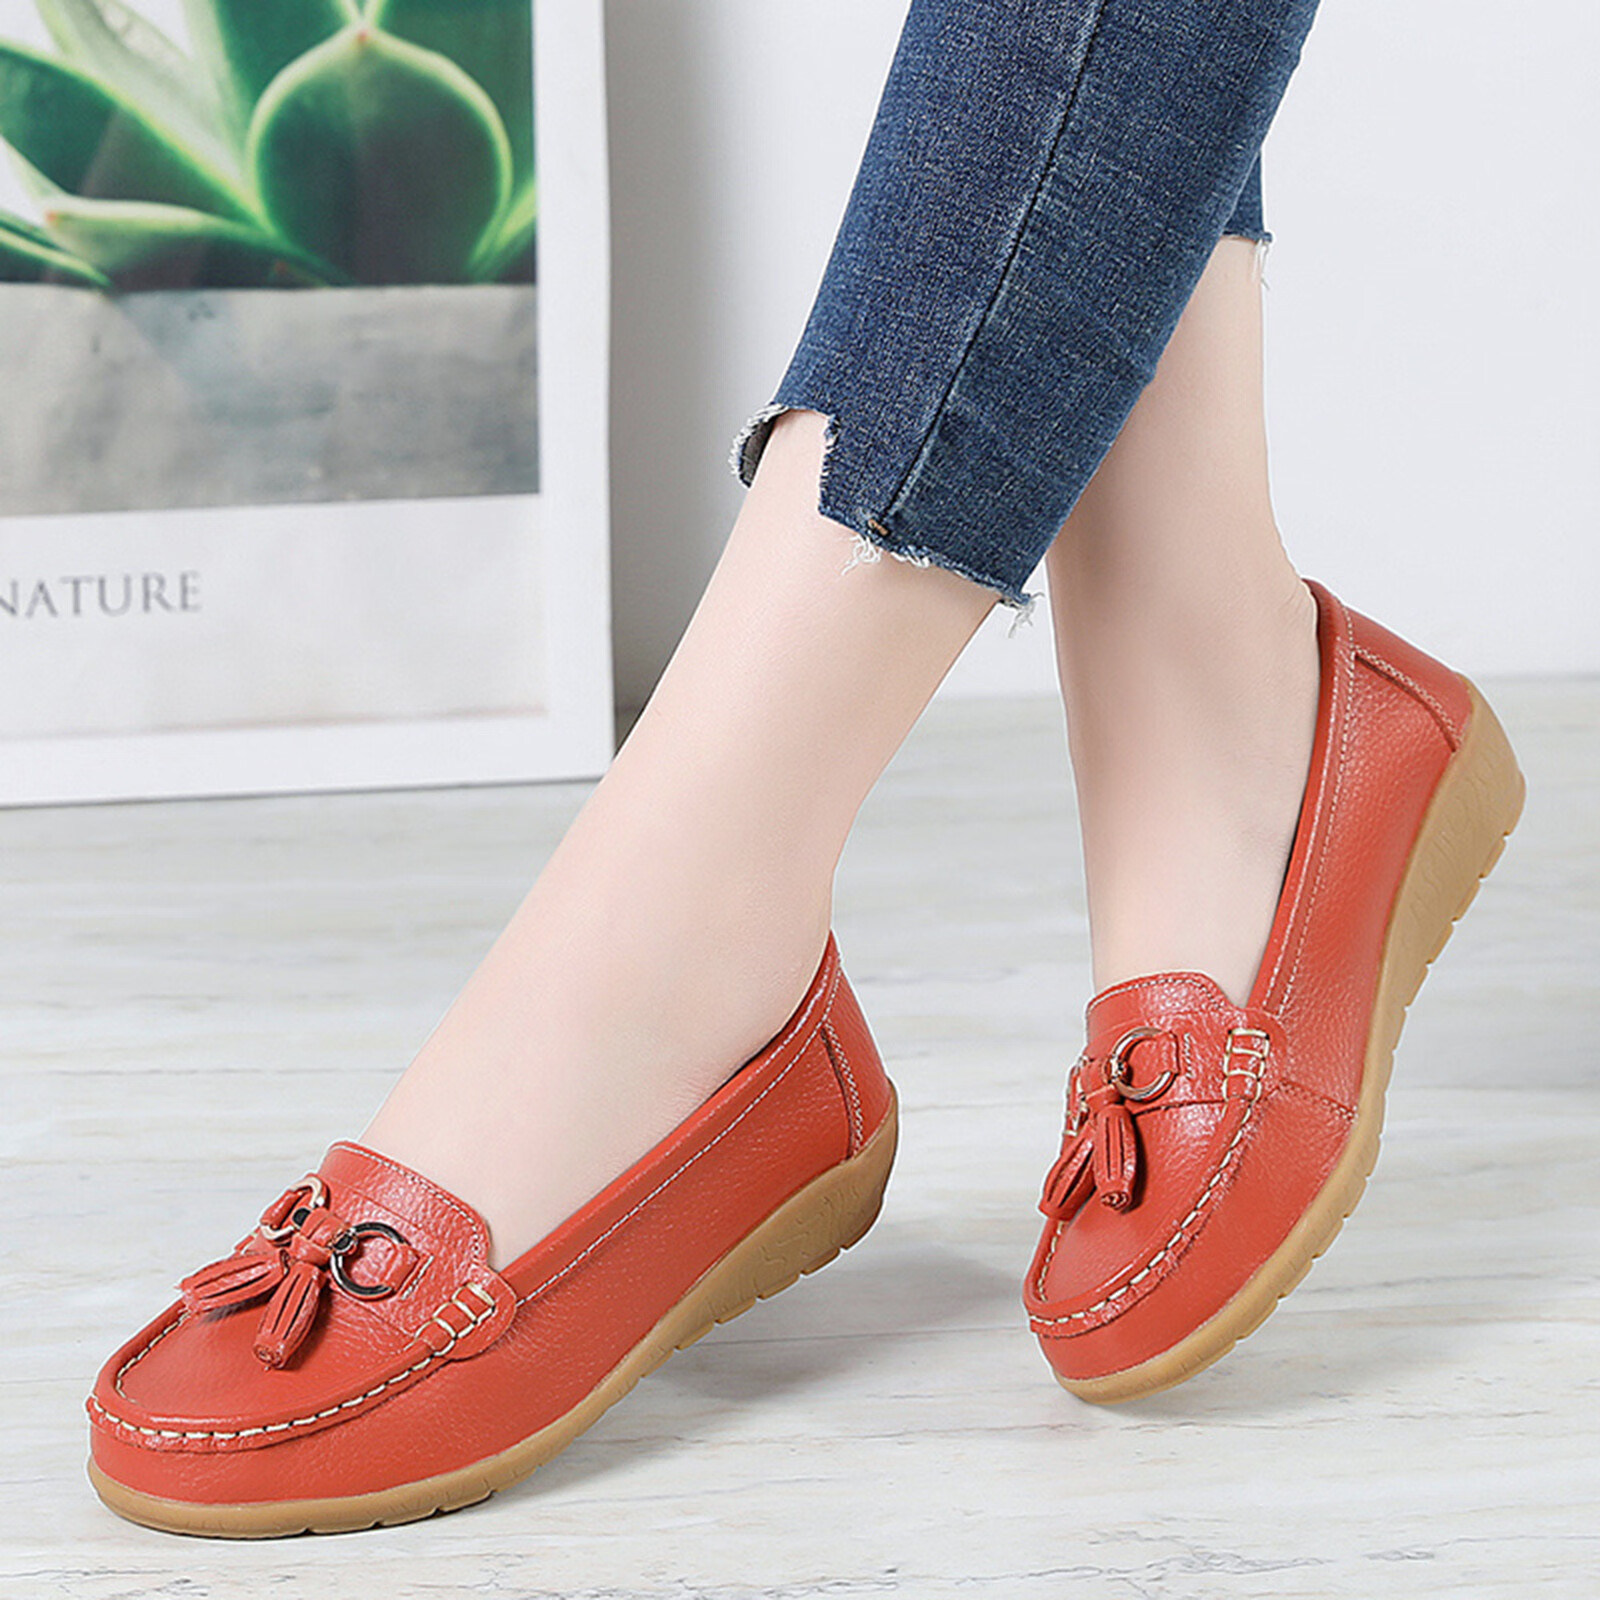 Womens Comfort Walking Flat Loafer Slip On Leather Loafer Comfortable Flat Shoes Outdoor Driving Shoes PU Orange Flats Shoes for Women - image 2 of 6